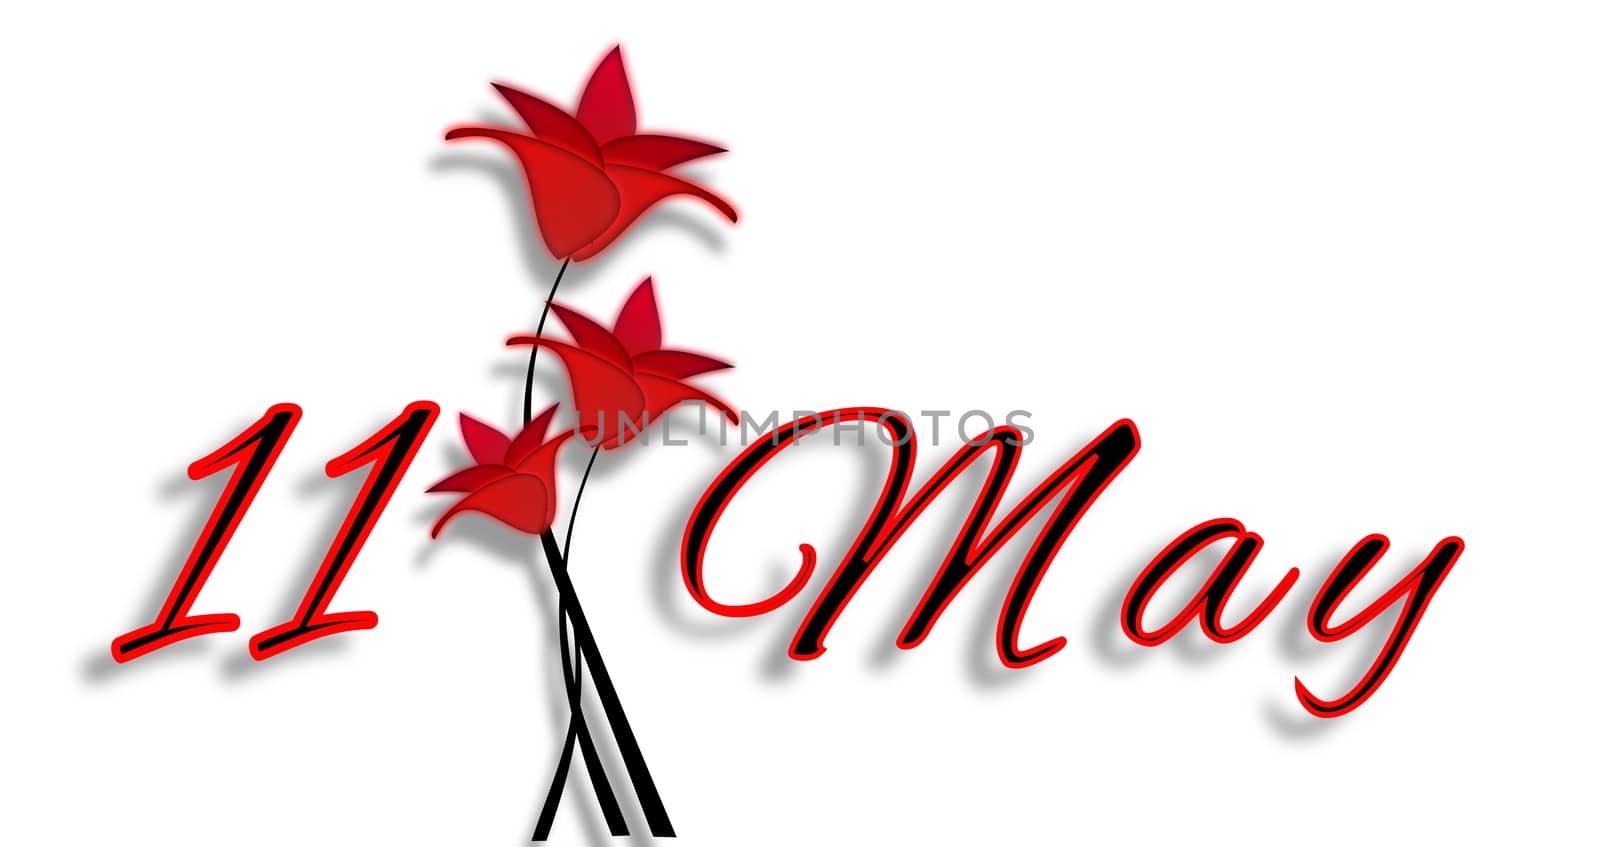 Mother's Day on May 11th with red flowers isolated on a white background
